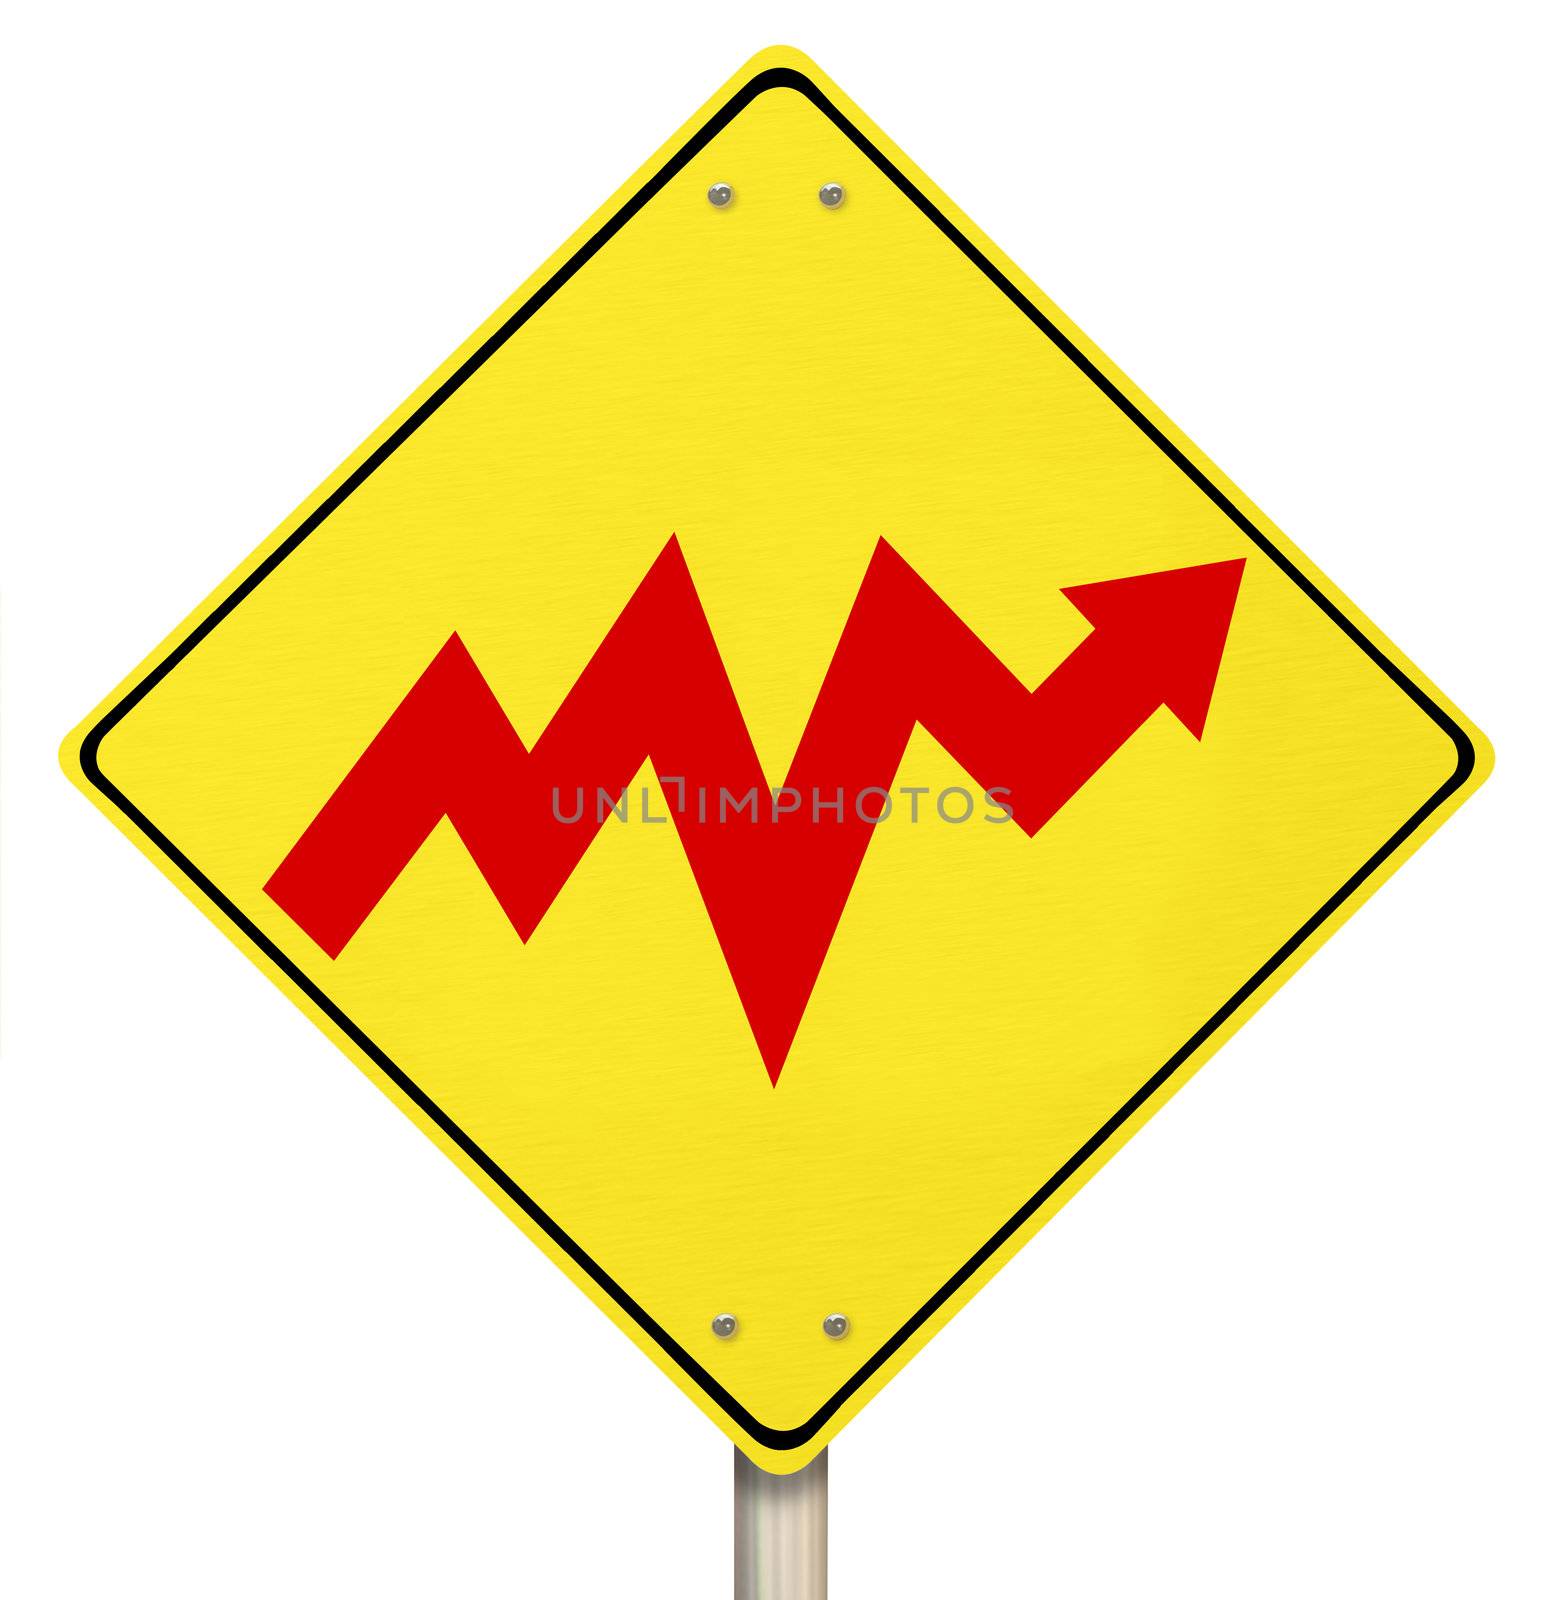 A yellow diamond-shaped road sign with an arrow going up and down in a volatile fashion representing bipolar nature of stock market and the economy, or the emotional rise and fall of bipolar disorder